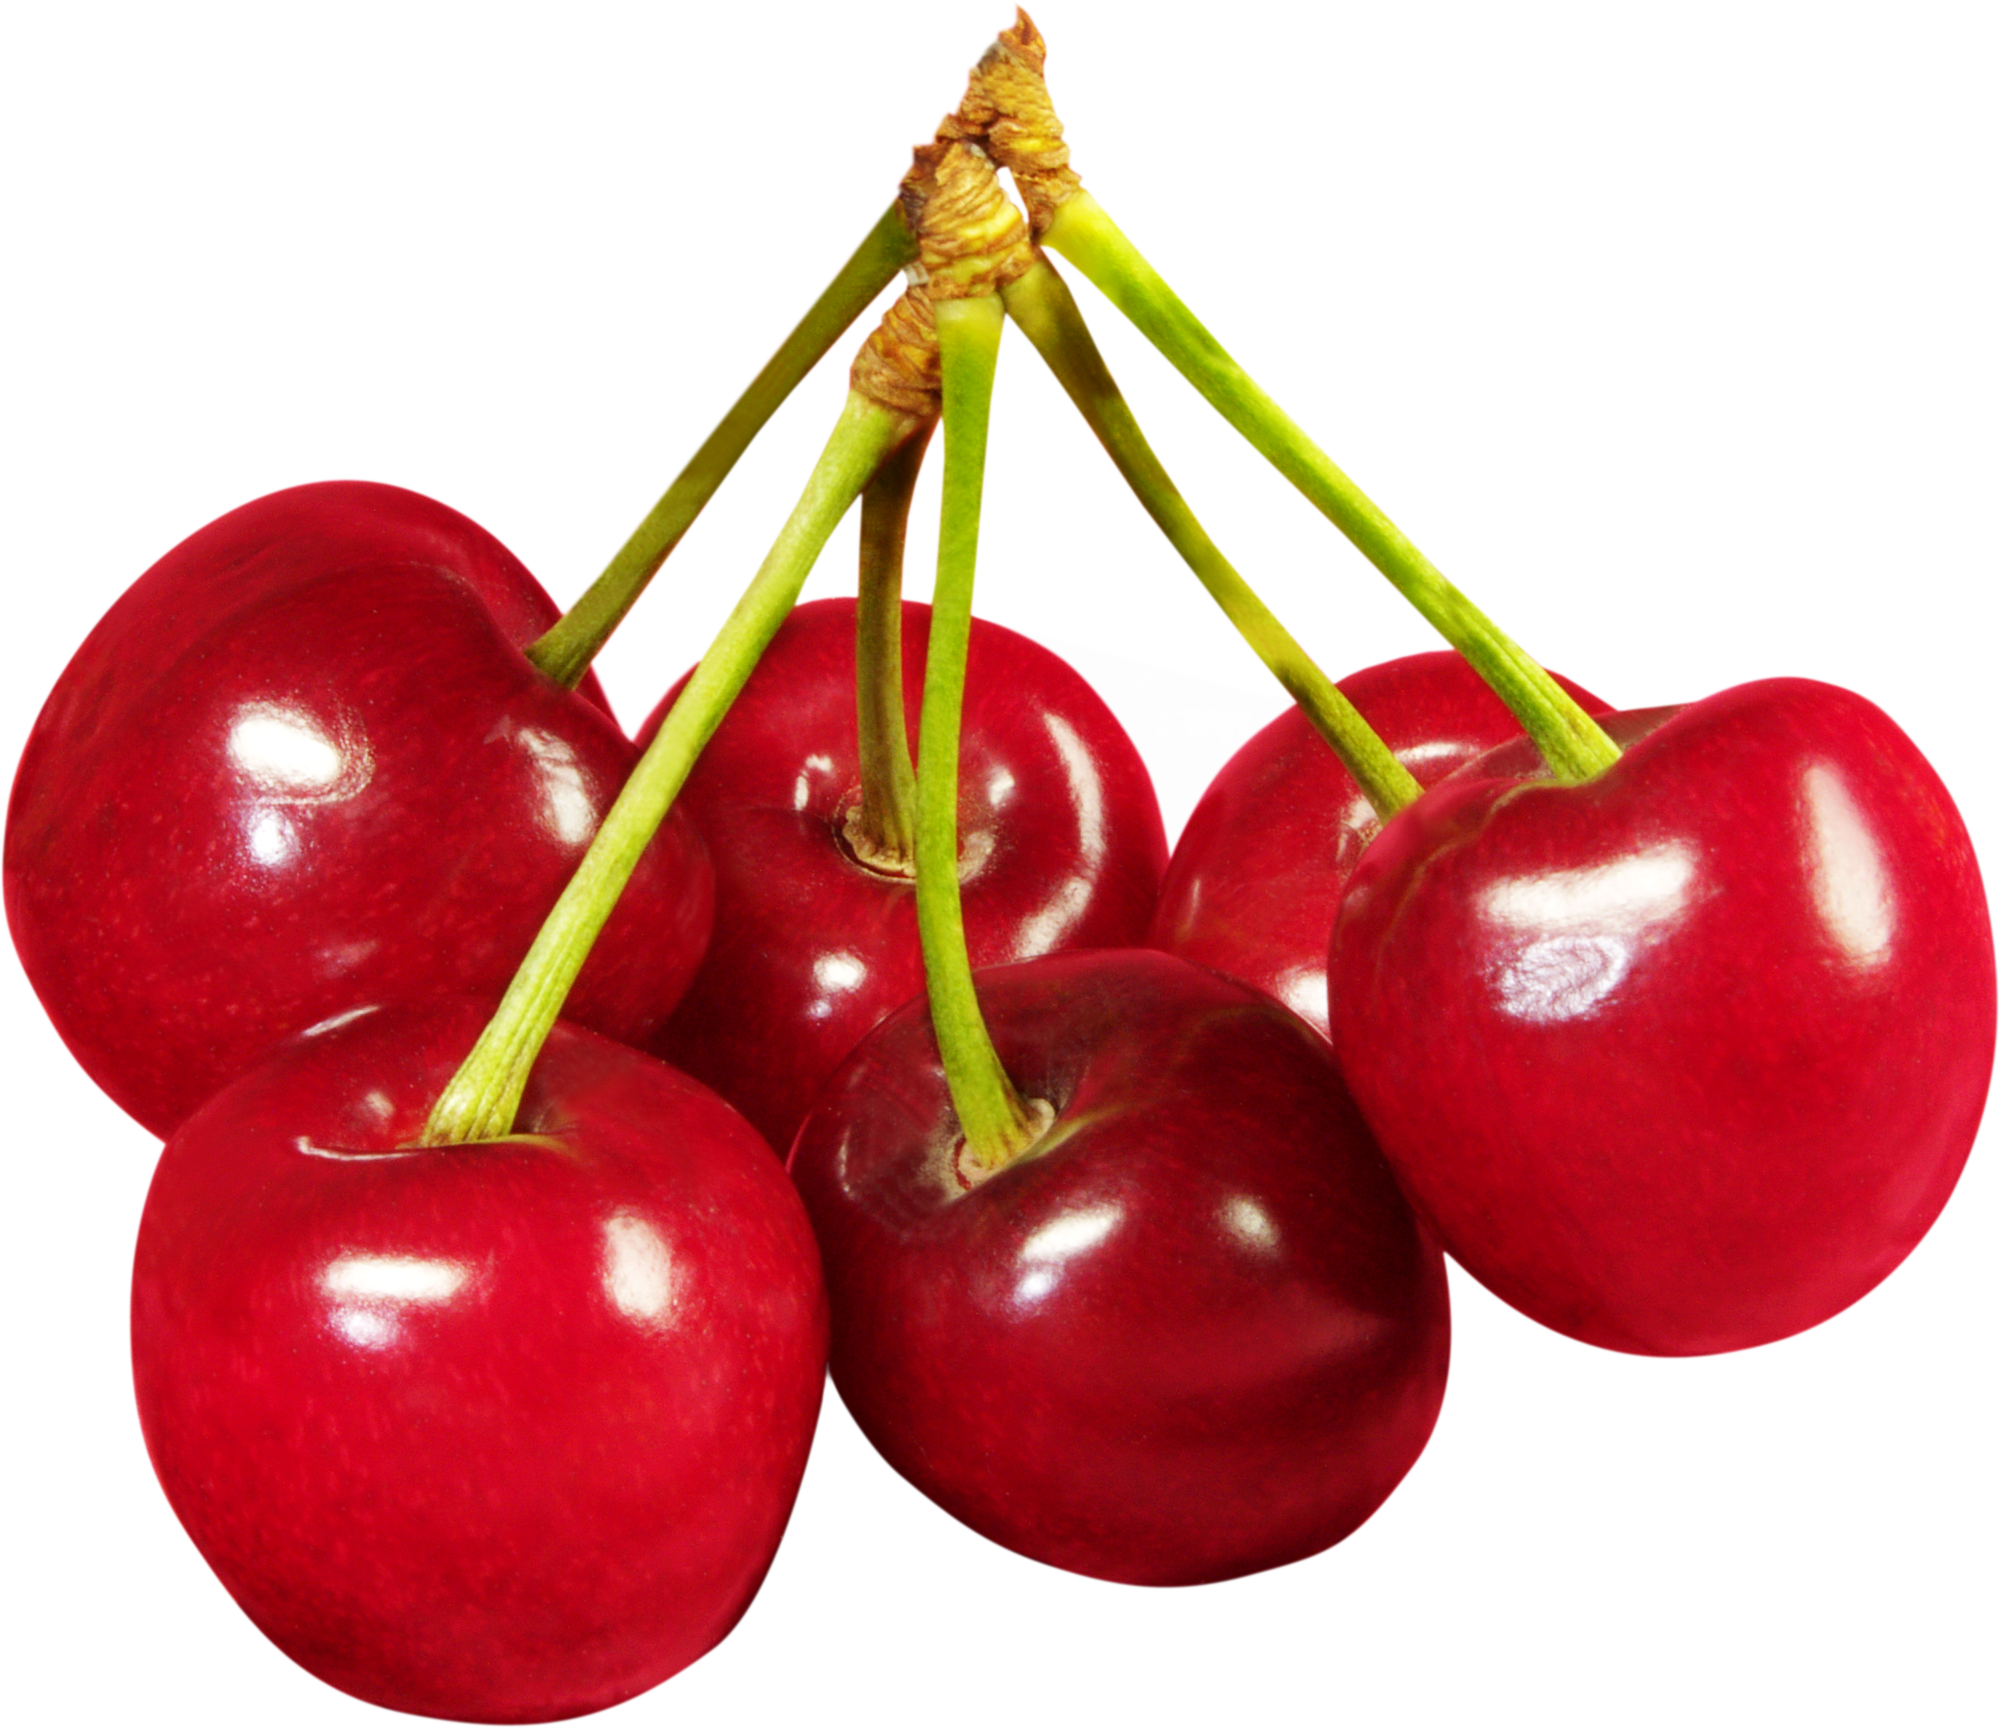 Amazing Cherry Pictures & Backgrounds